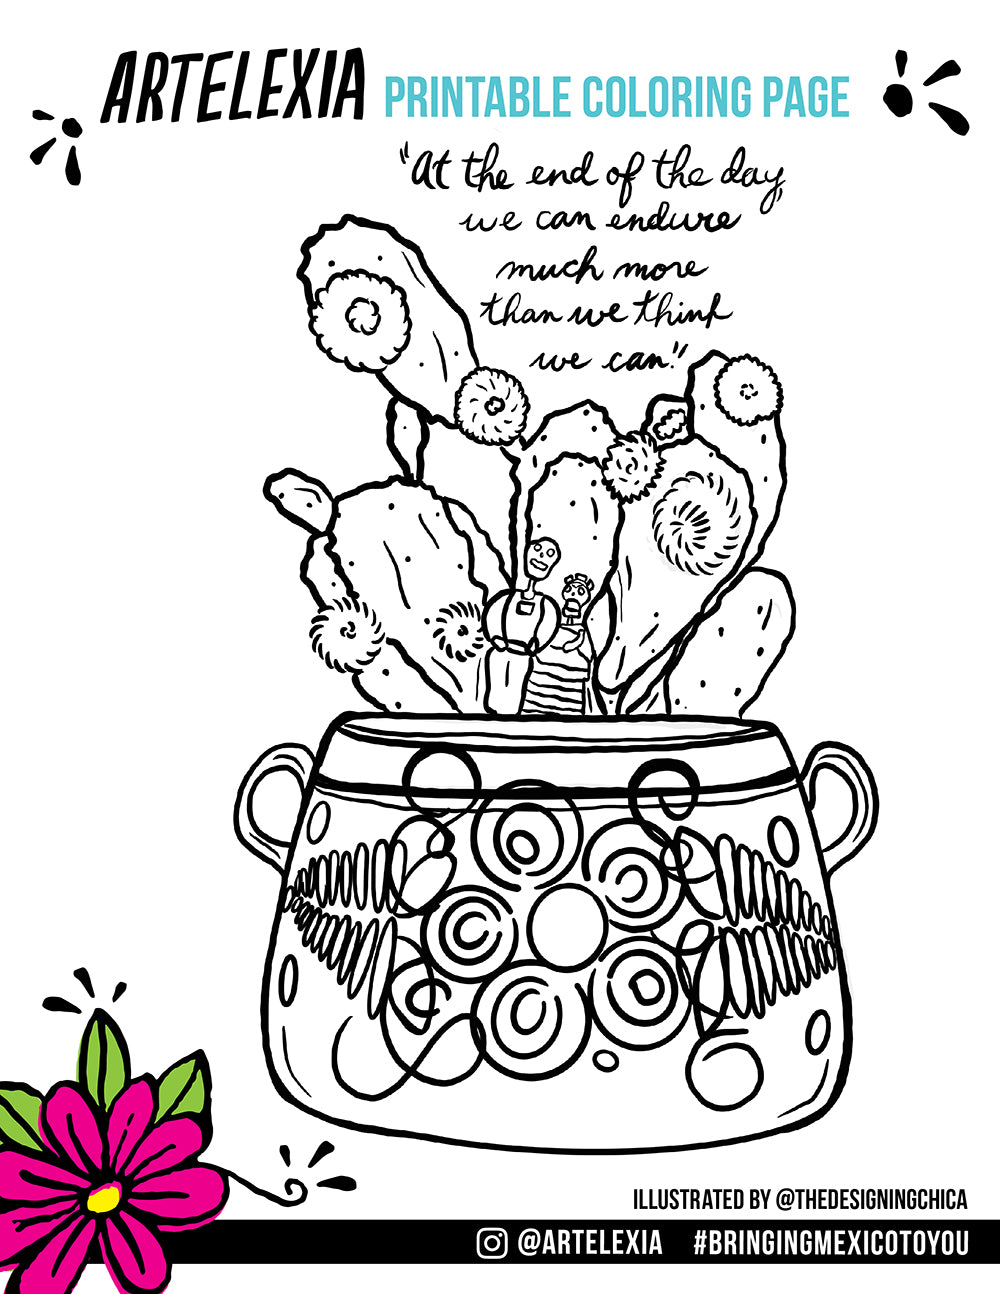 Artelexia's Free Printable Coloring Page by The Designing Chica